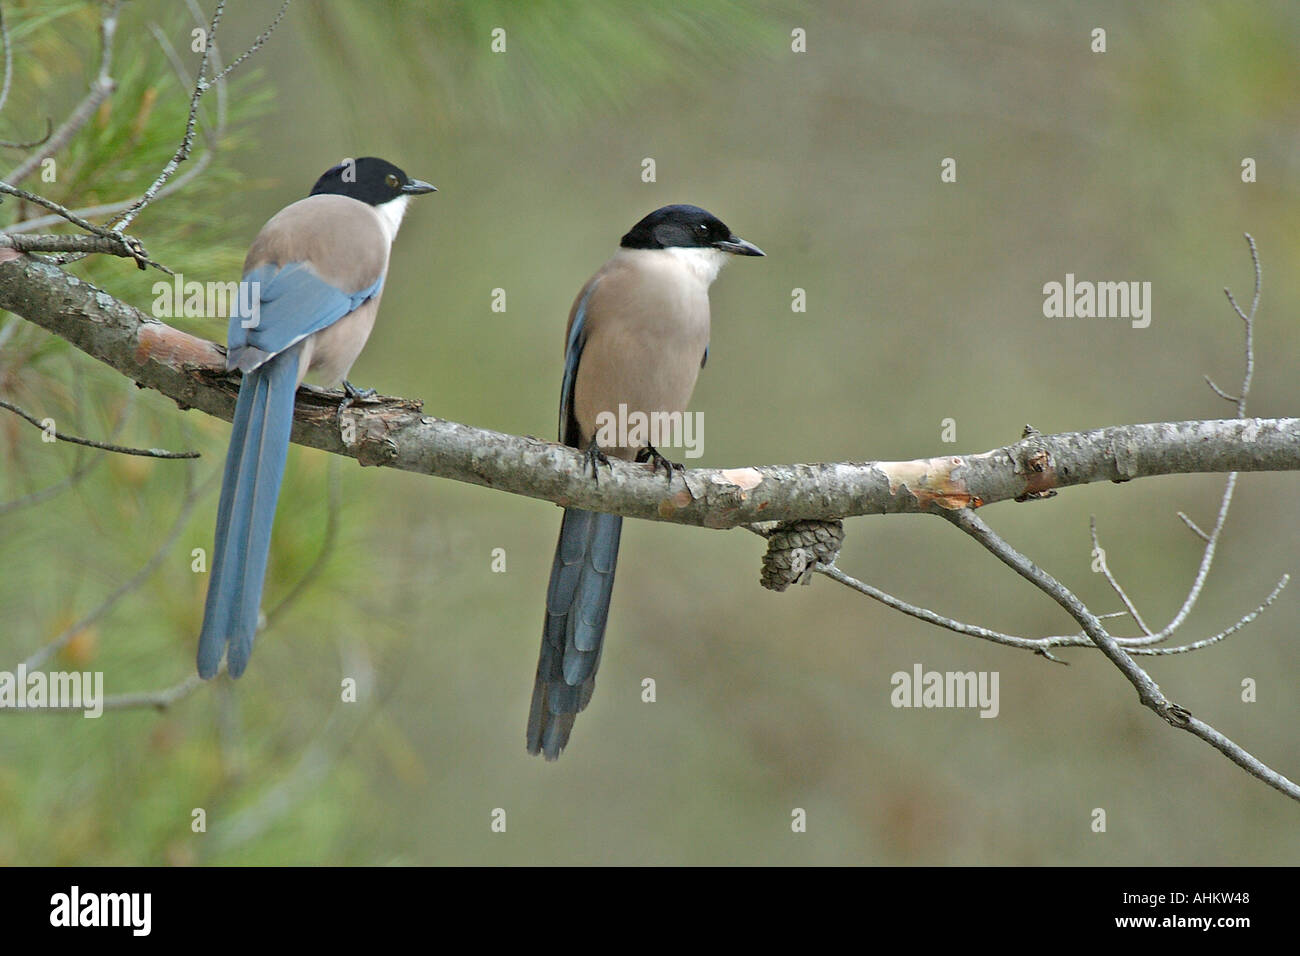 Pair perched on branch Spain April Stock Photo